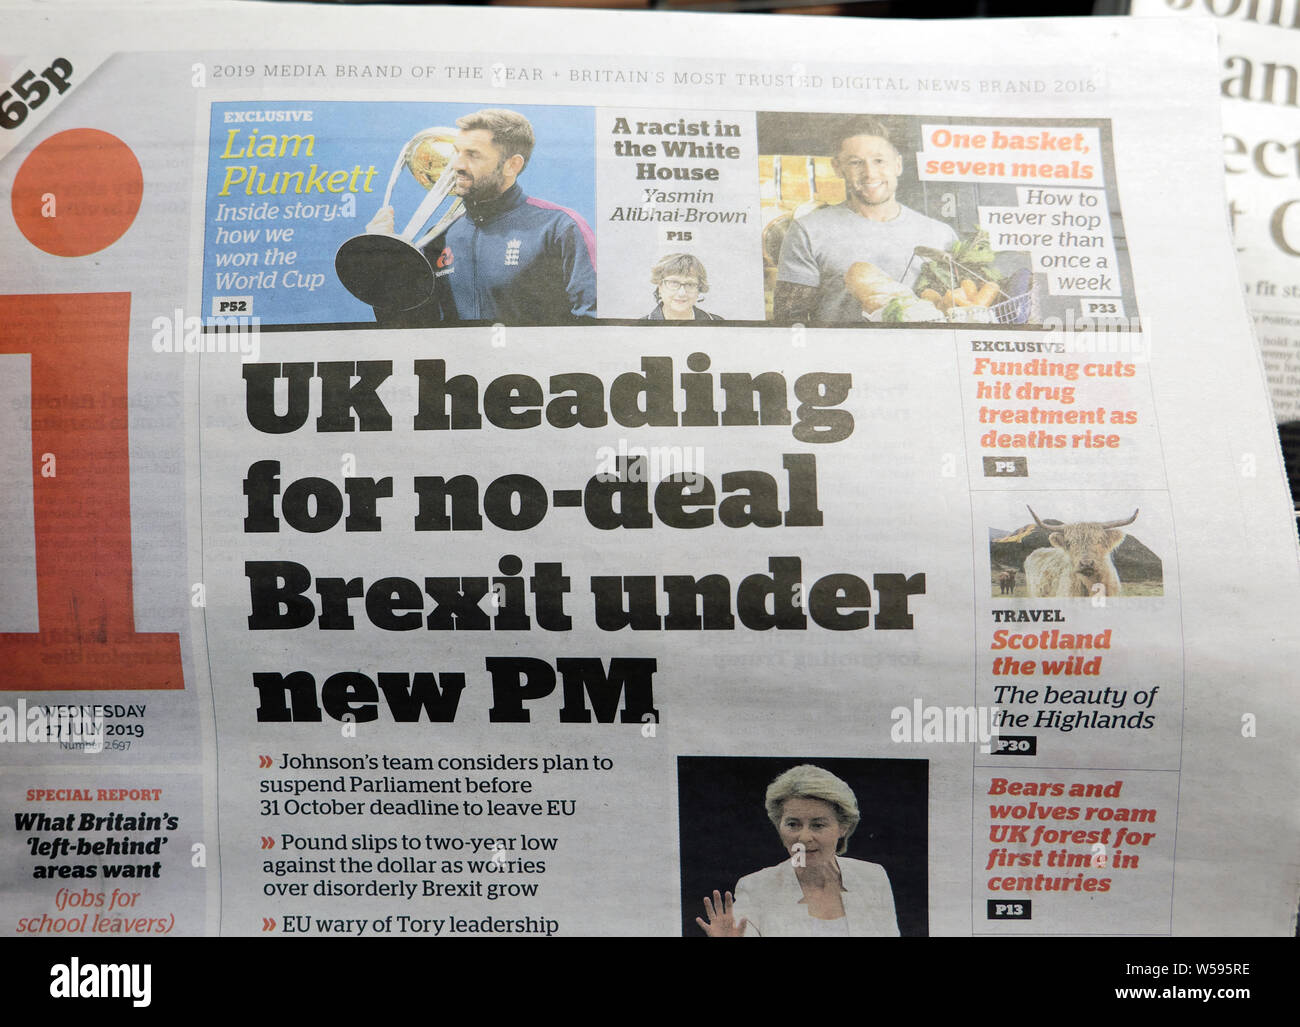 i newspaper headline 'UK heading for no-deal Brexit under new PM' on front page 27 July 2019 London England UK Stock Photo